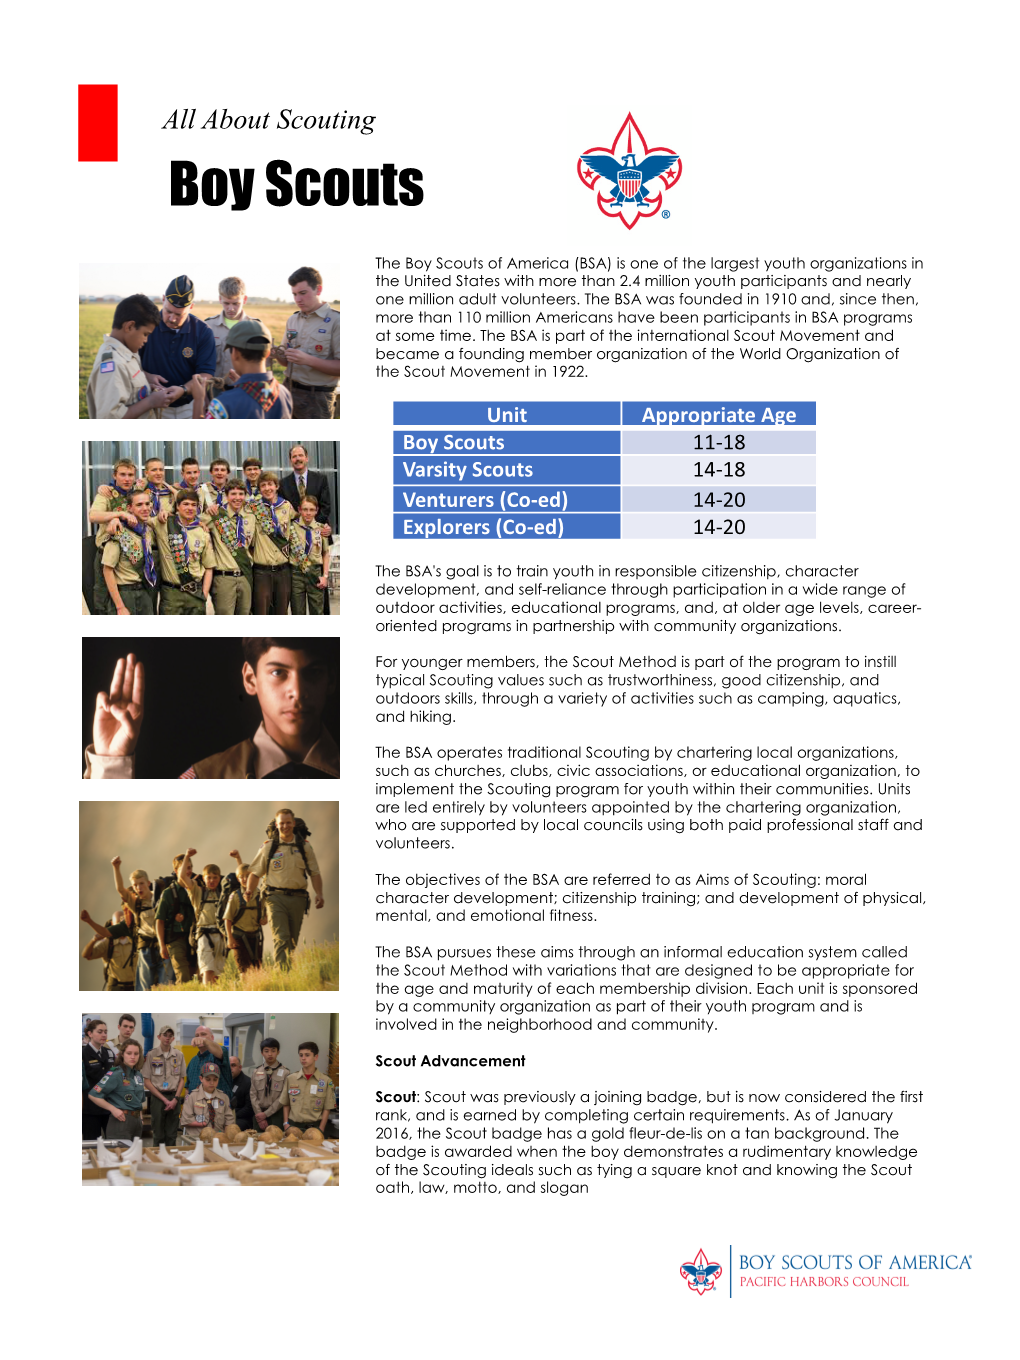 About Scouting Boy Scouts